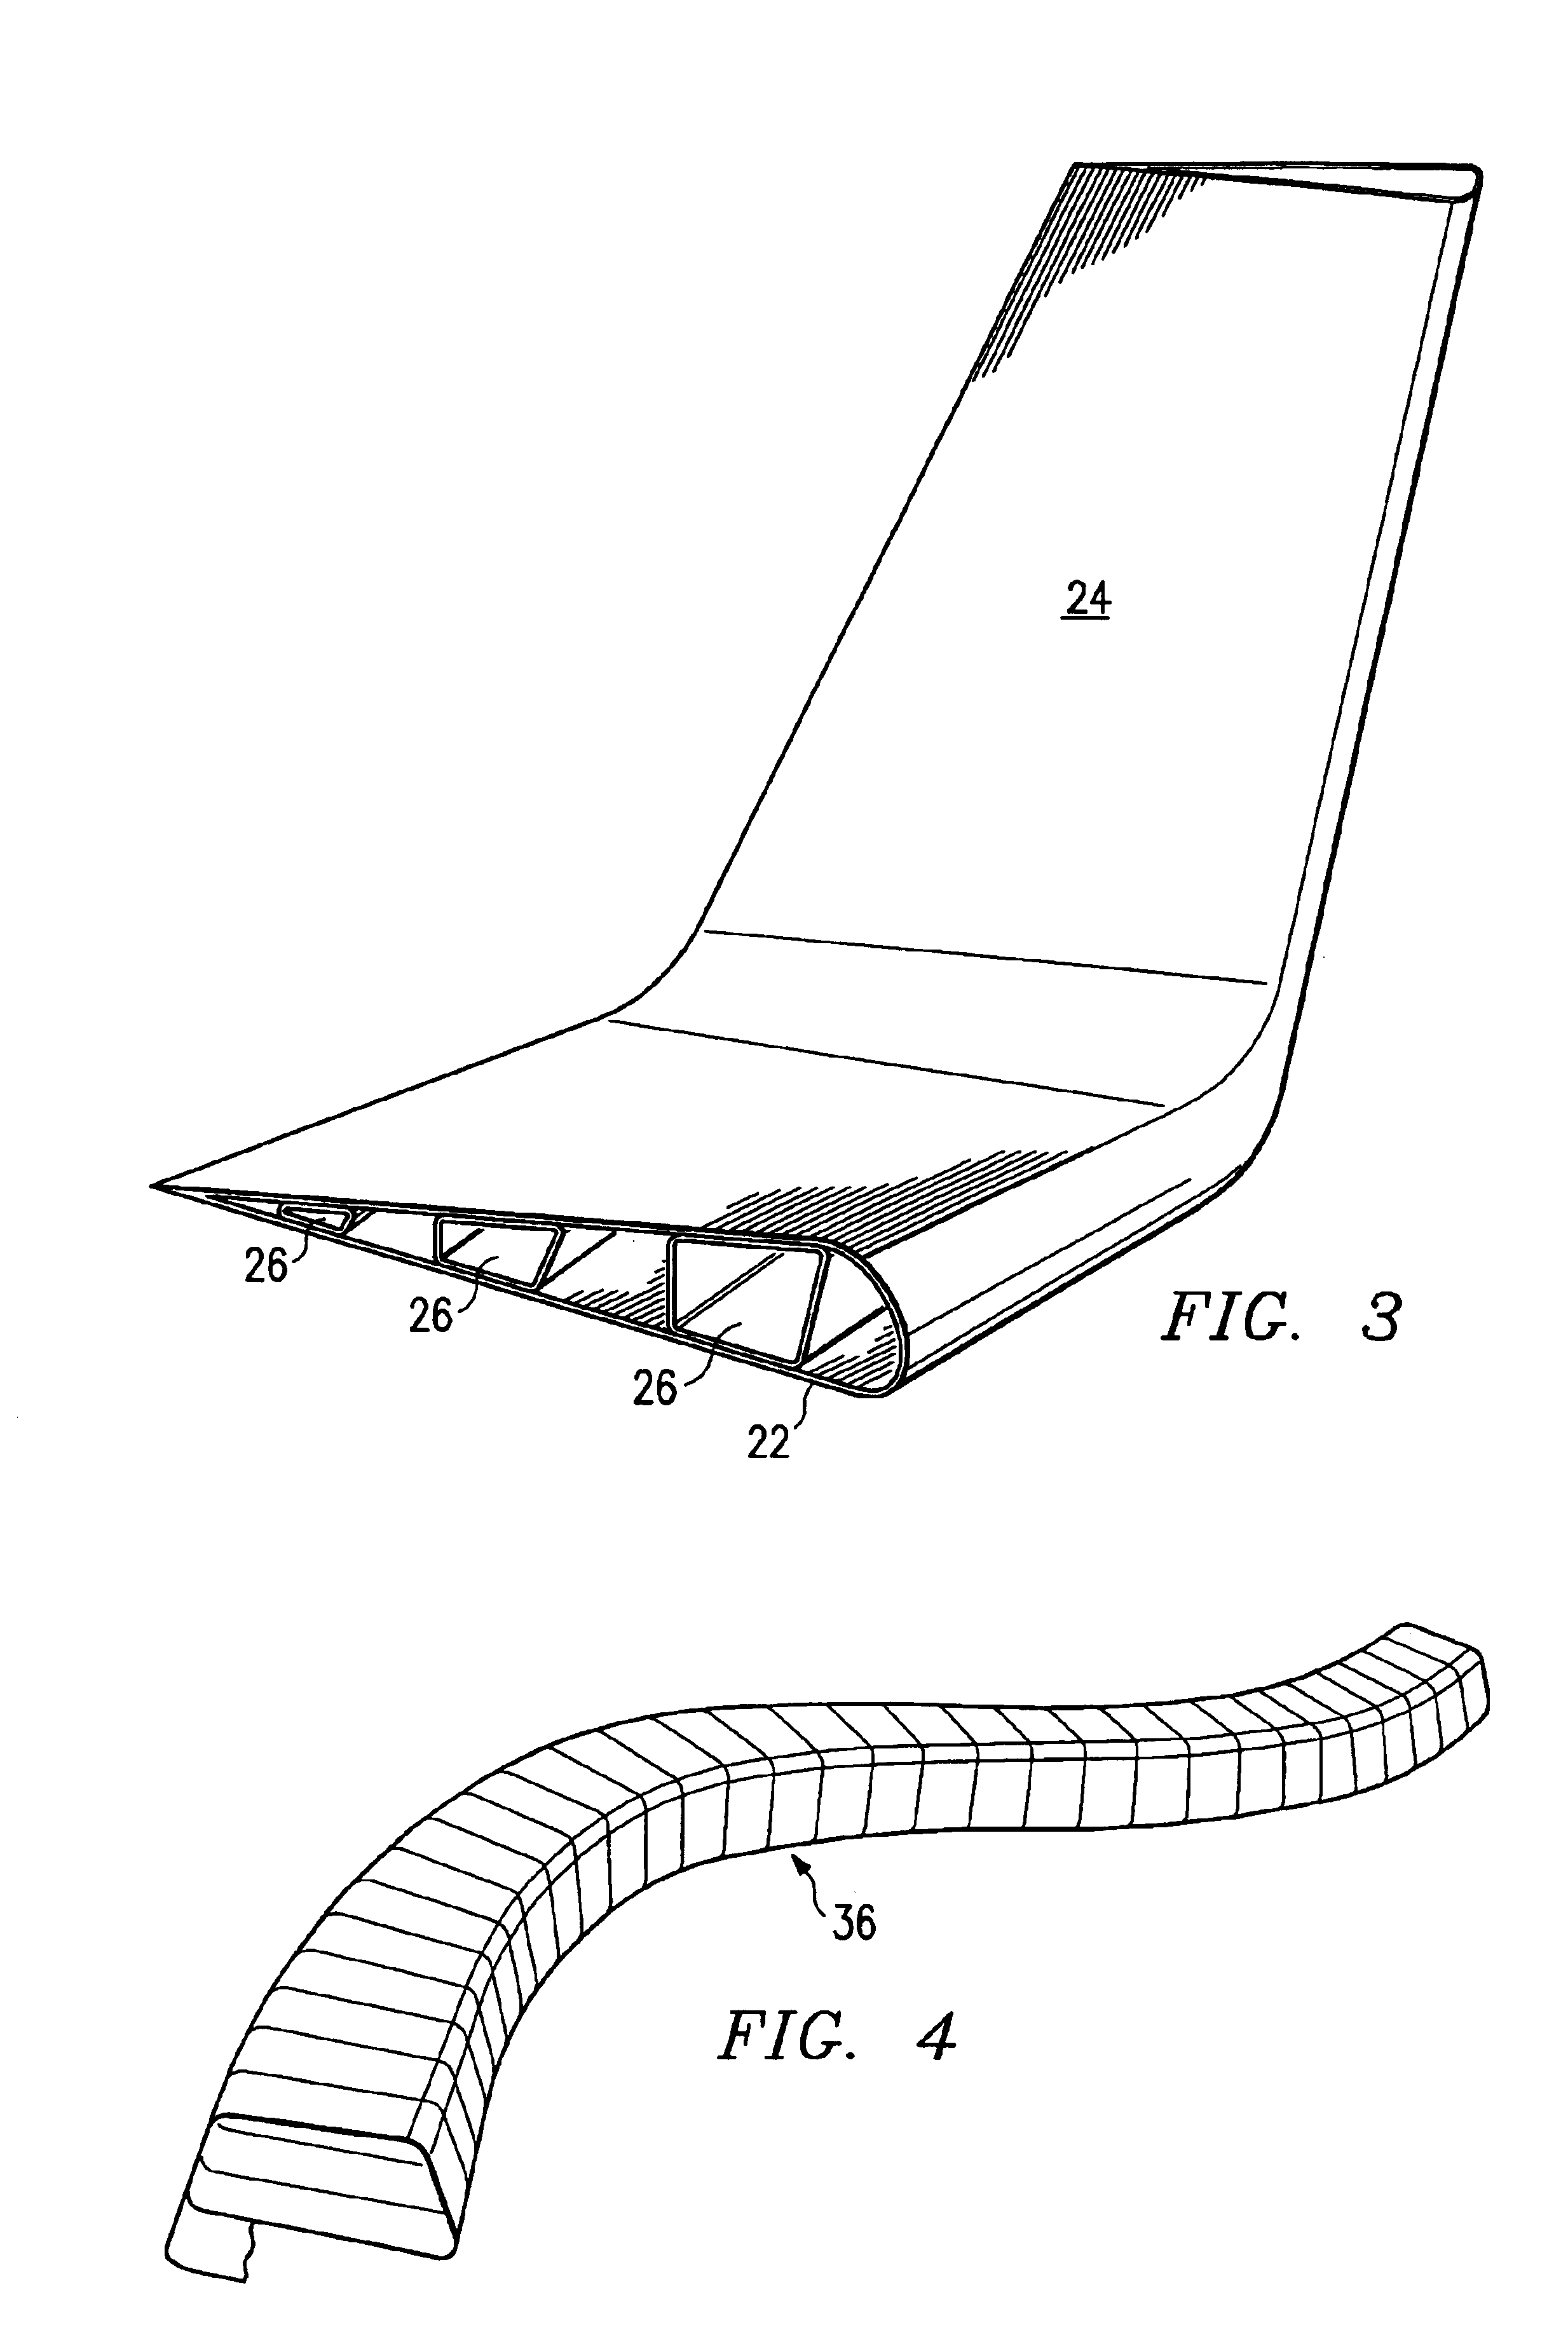 Co-cured composite structures and method of making them